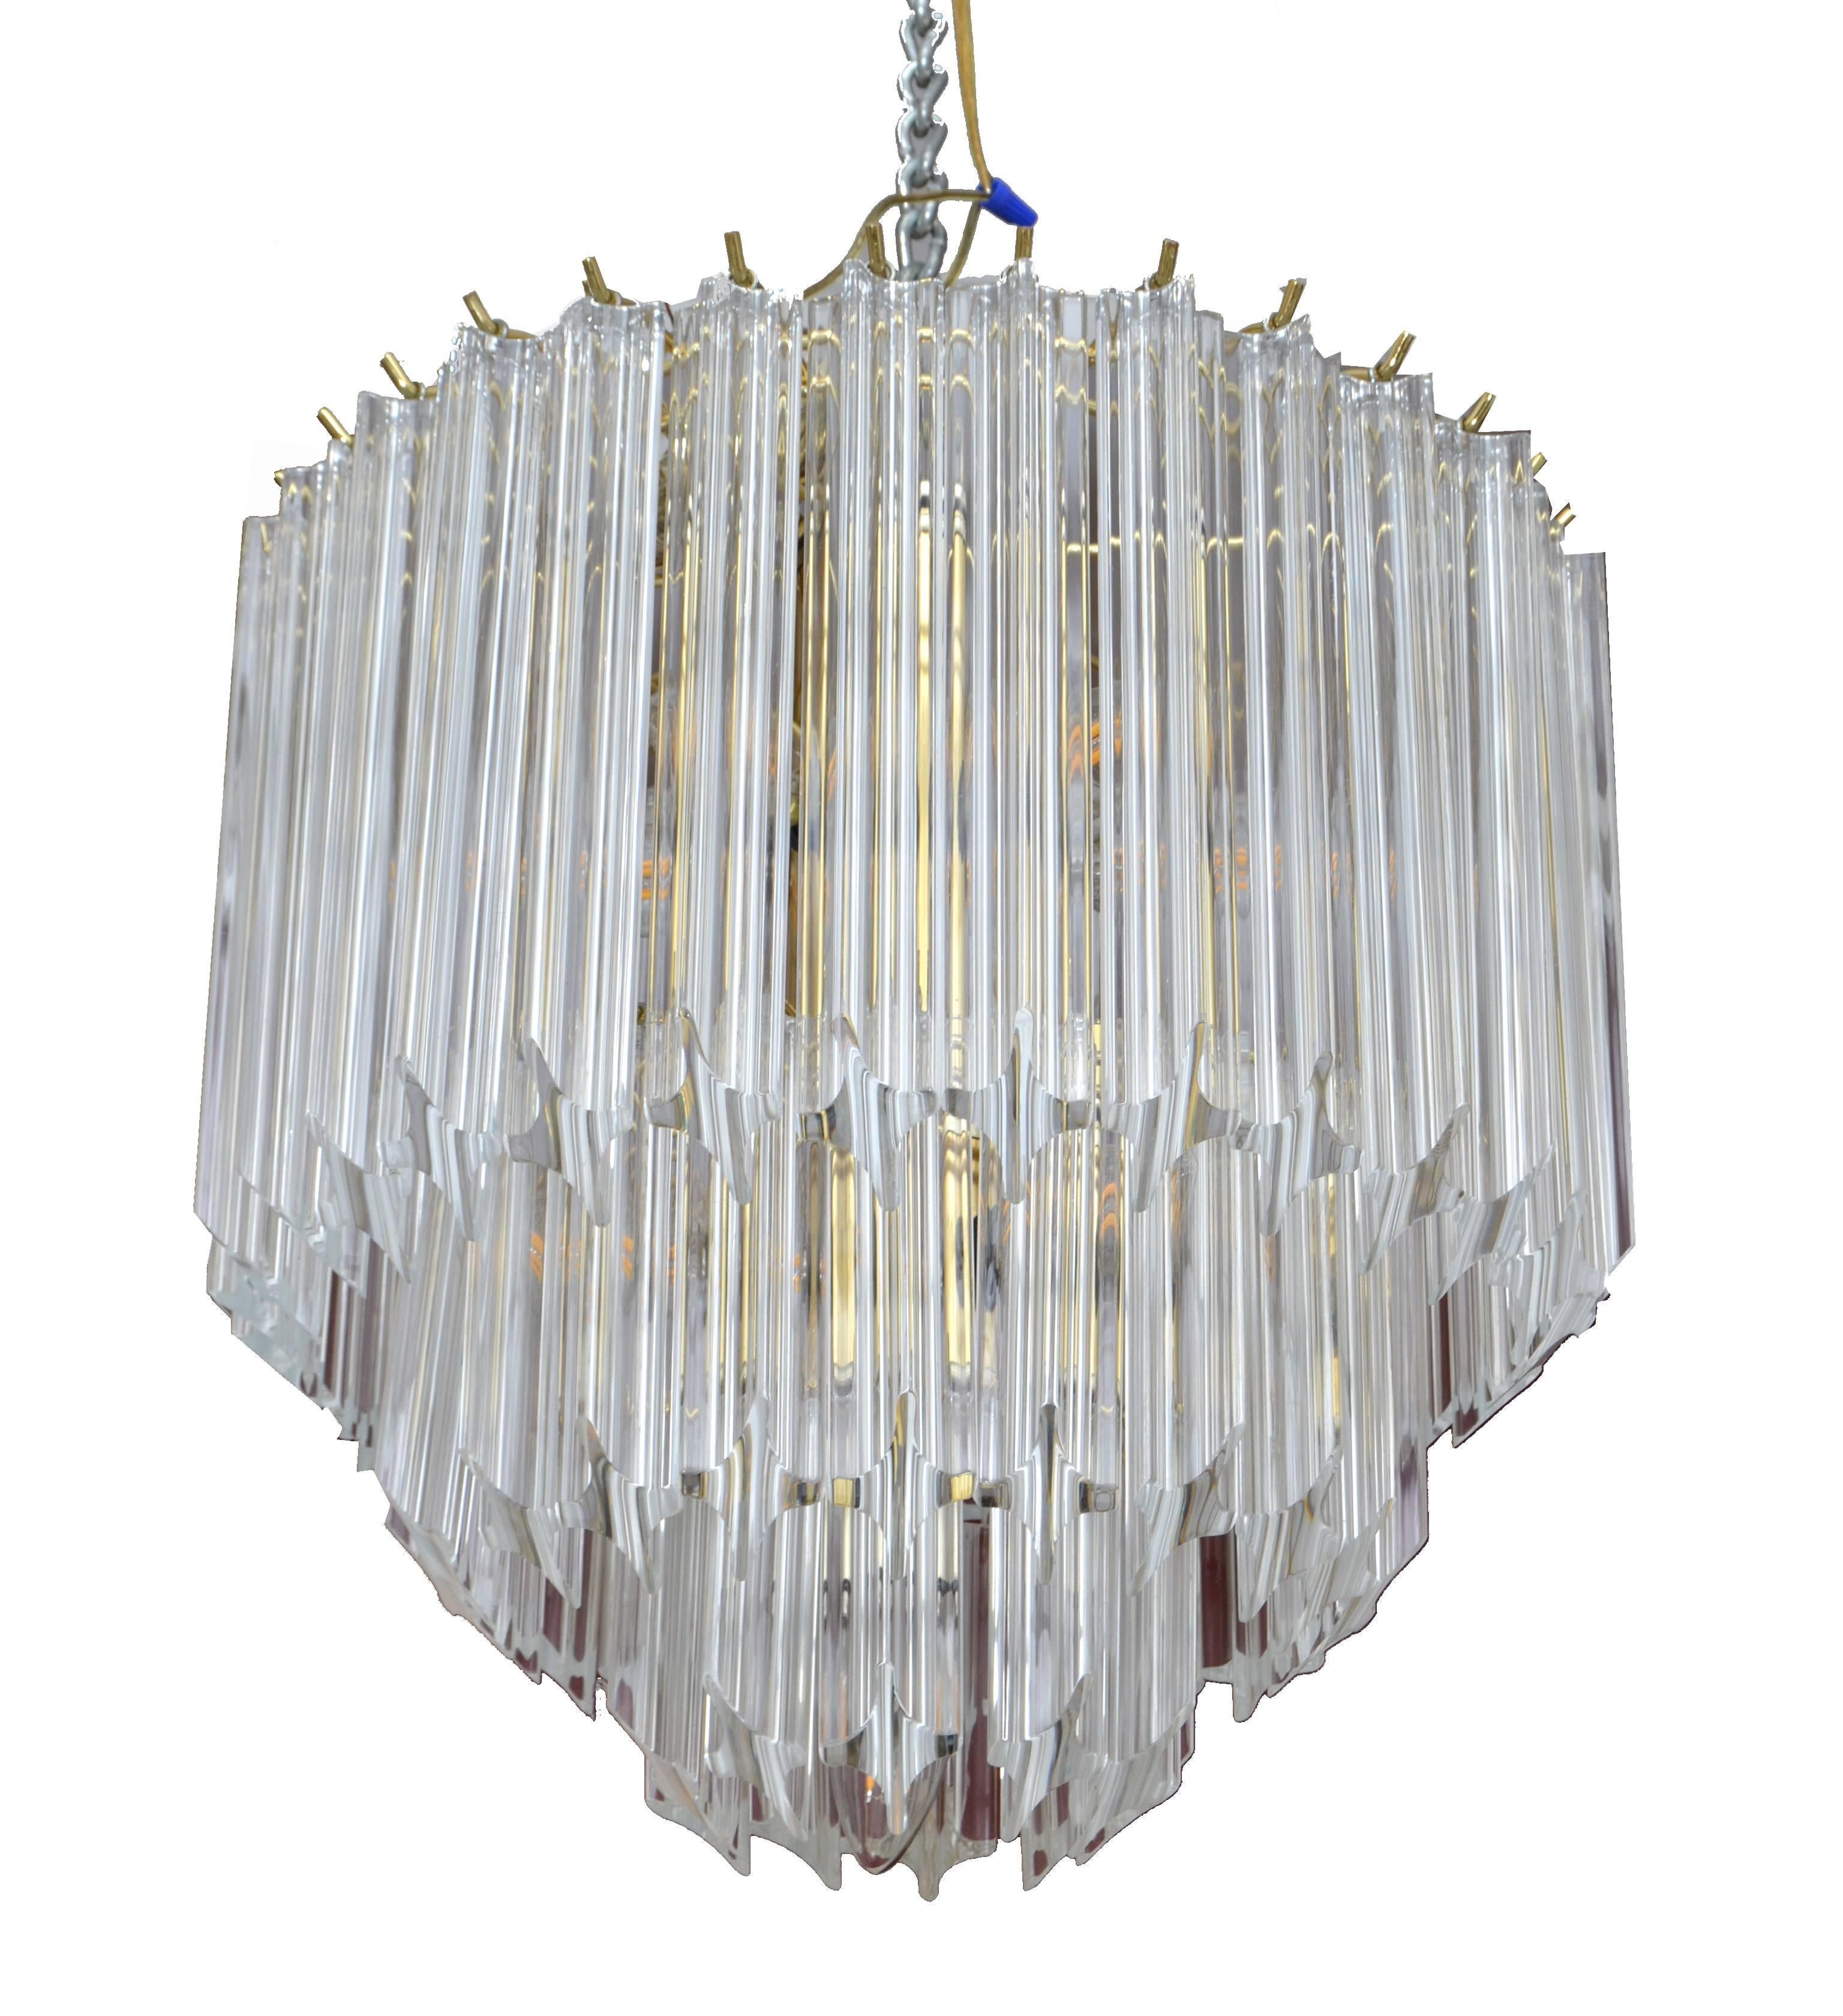 Mid-Century Modern brass and Lucite chandelier.
The Lucite Prisms have three different sizes and will be hung on three different levels, very impressive when it is hanging.
In perfect working condition and uses ten light bulbs, max. 25 watts, we use